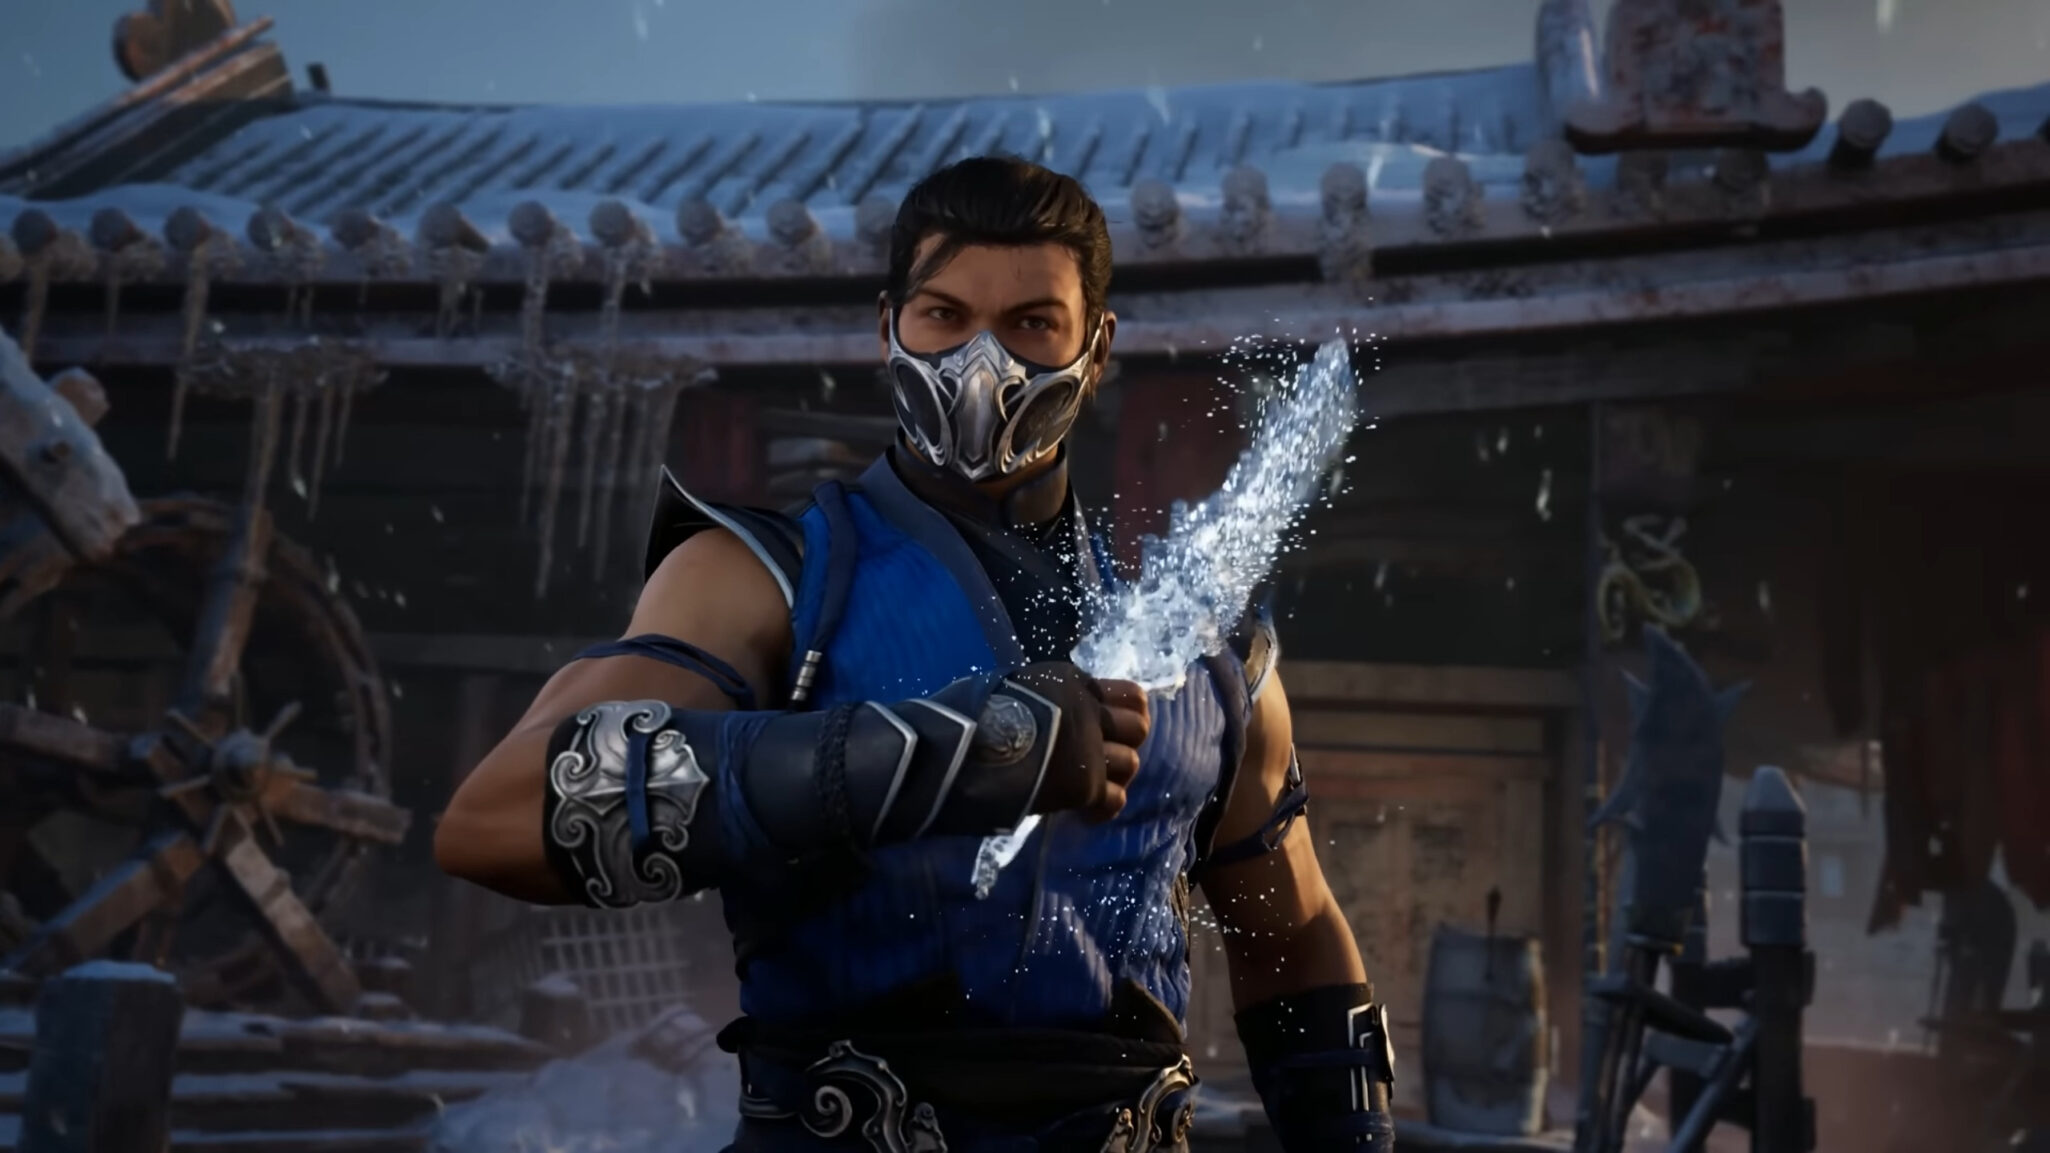 Mortal Kombat 1 - Release date, pre-order, characters, and more